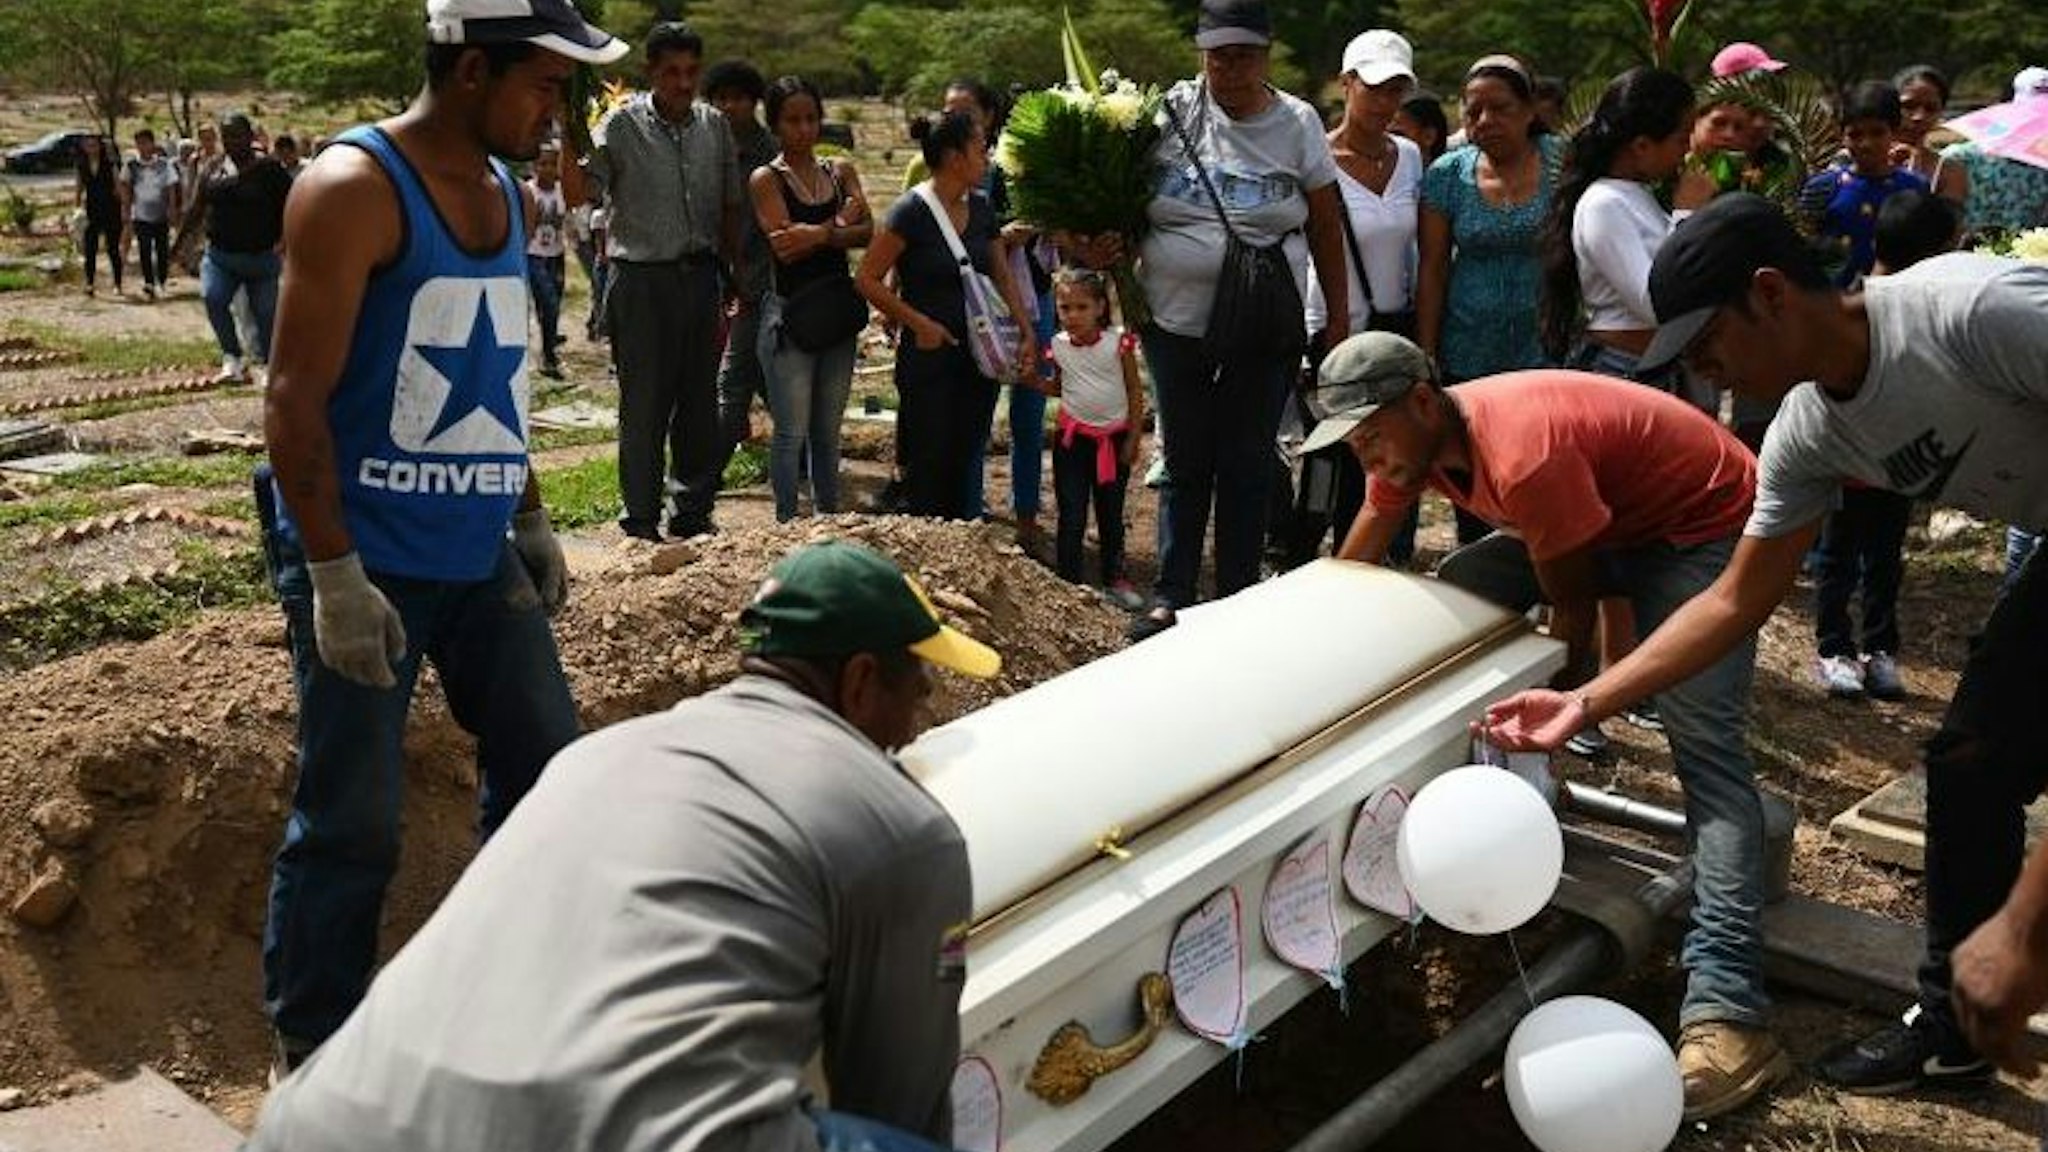 Family and friends attend the funeral of Erick Altuve a boy Venezuelan of 11, who died of cancer on May 26, in Caracas,on May 30, 2019. - Erick Altuve died of cancer while waiting to receive a bone marrow transplant at the Jose Manuel de los Rios Hospital, the main public pediatric hospital in Venezuela.